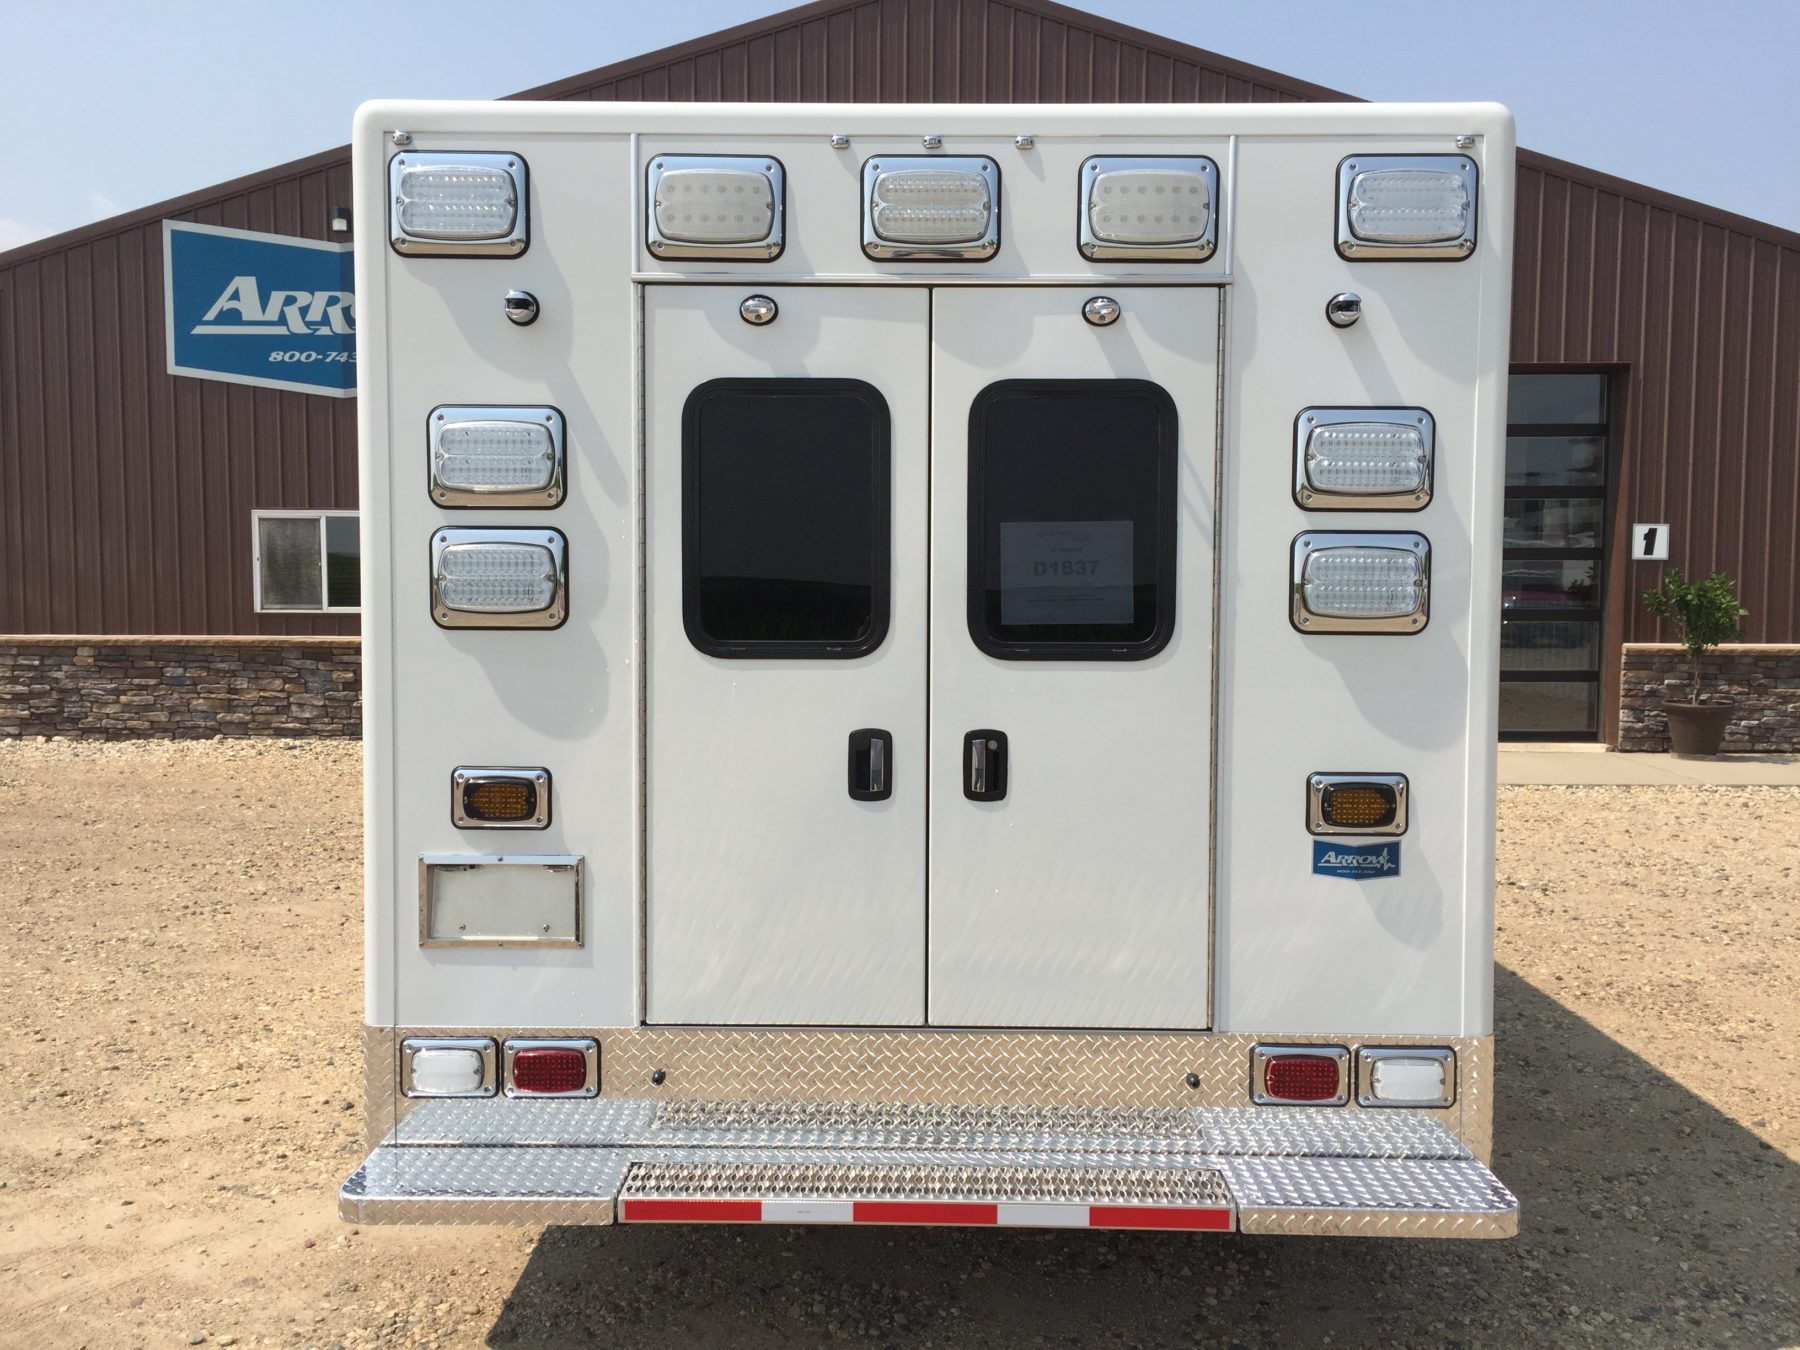 2009 Chevrolet G4500 Type 3 Ambulance For Sale – Picture 8